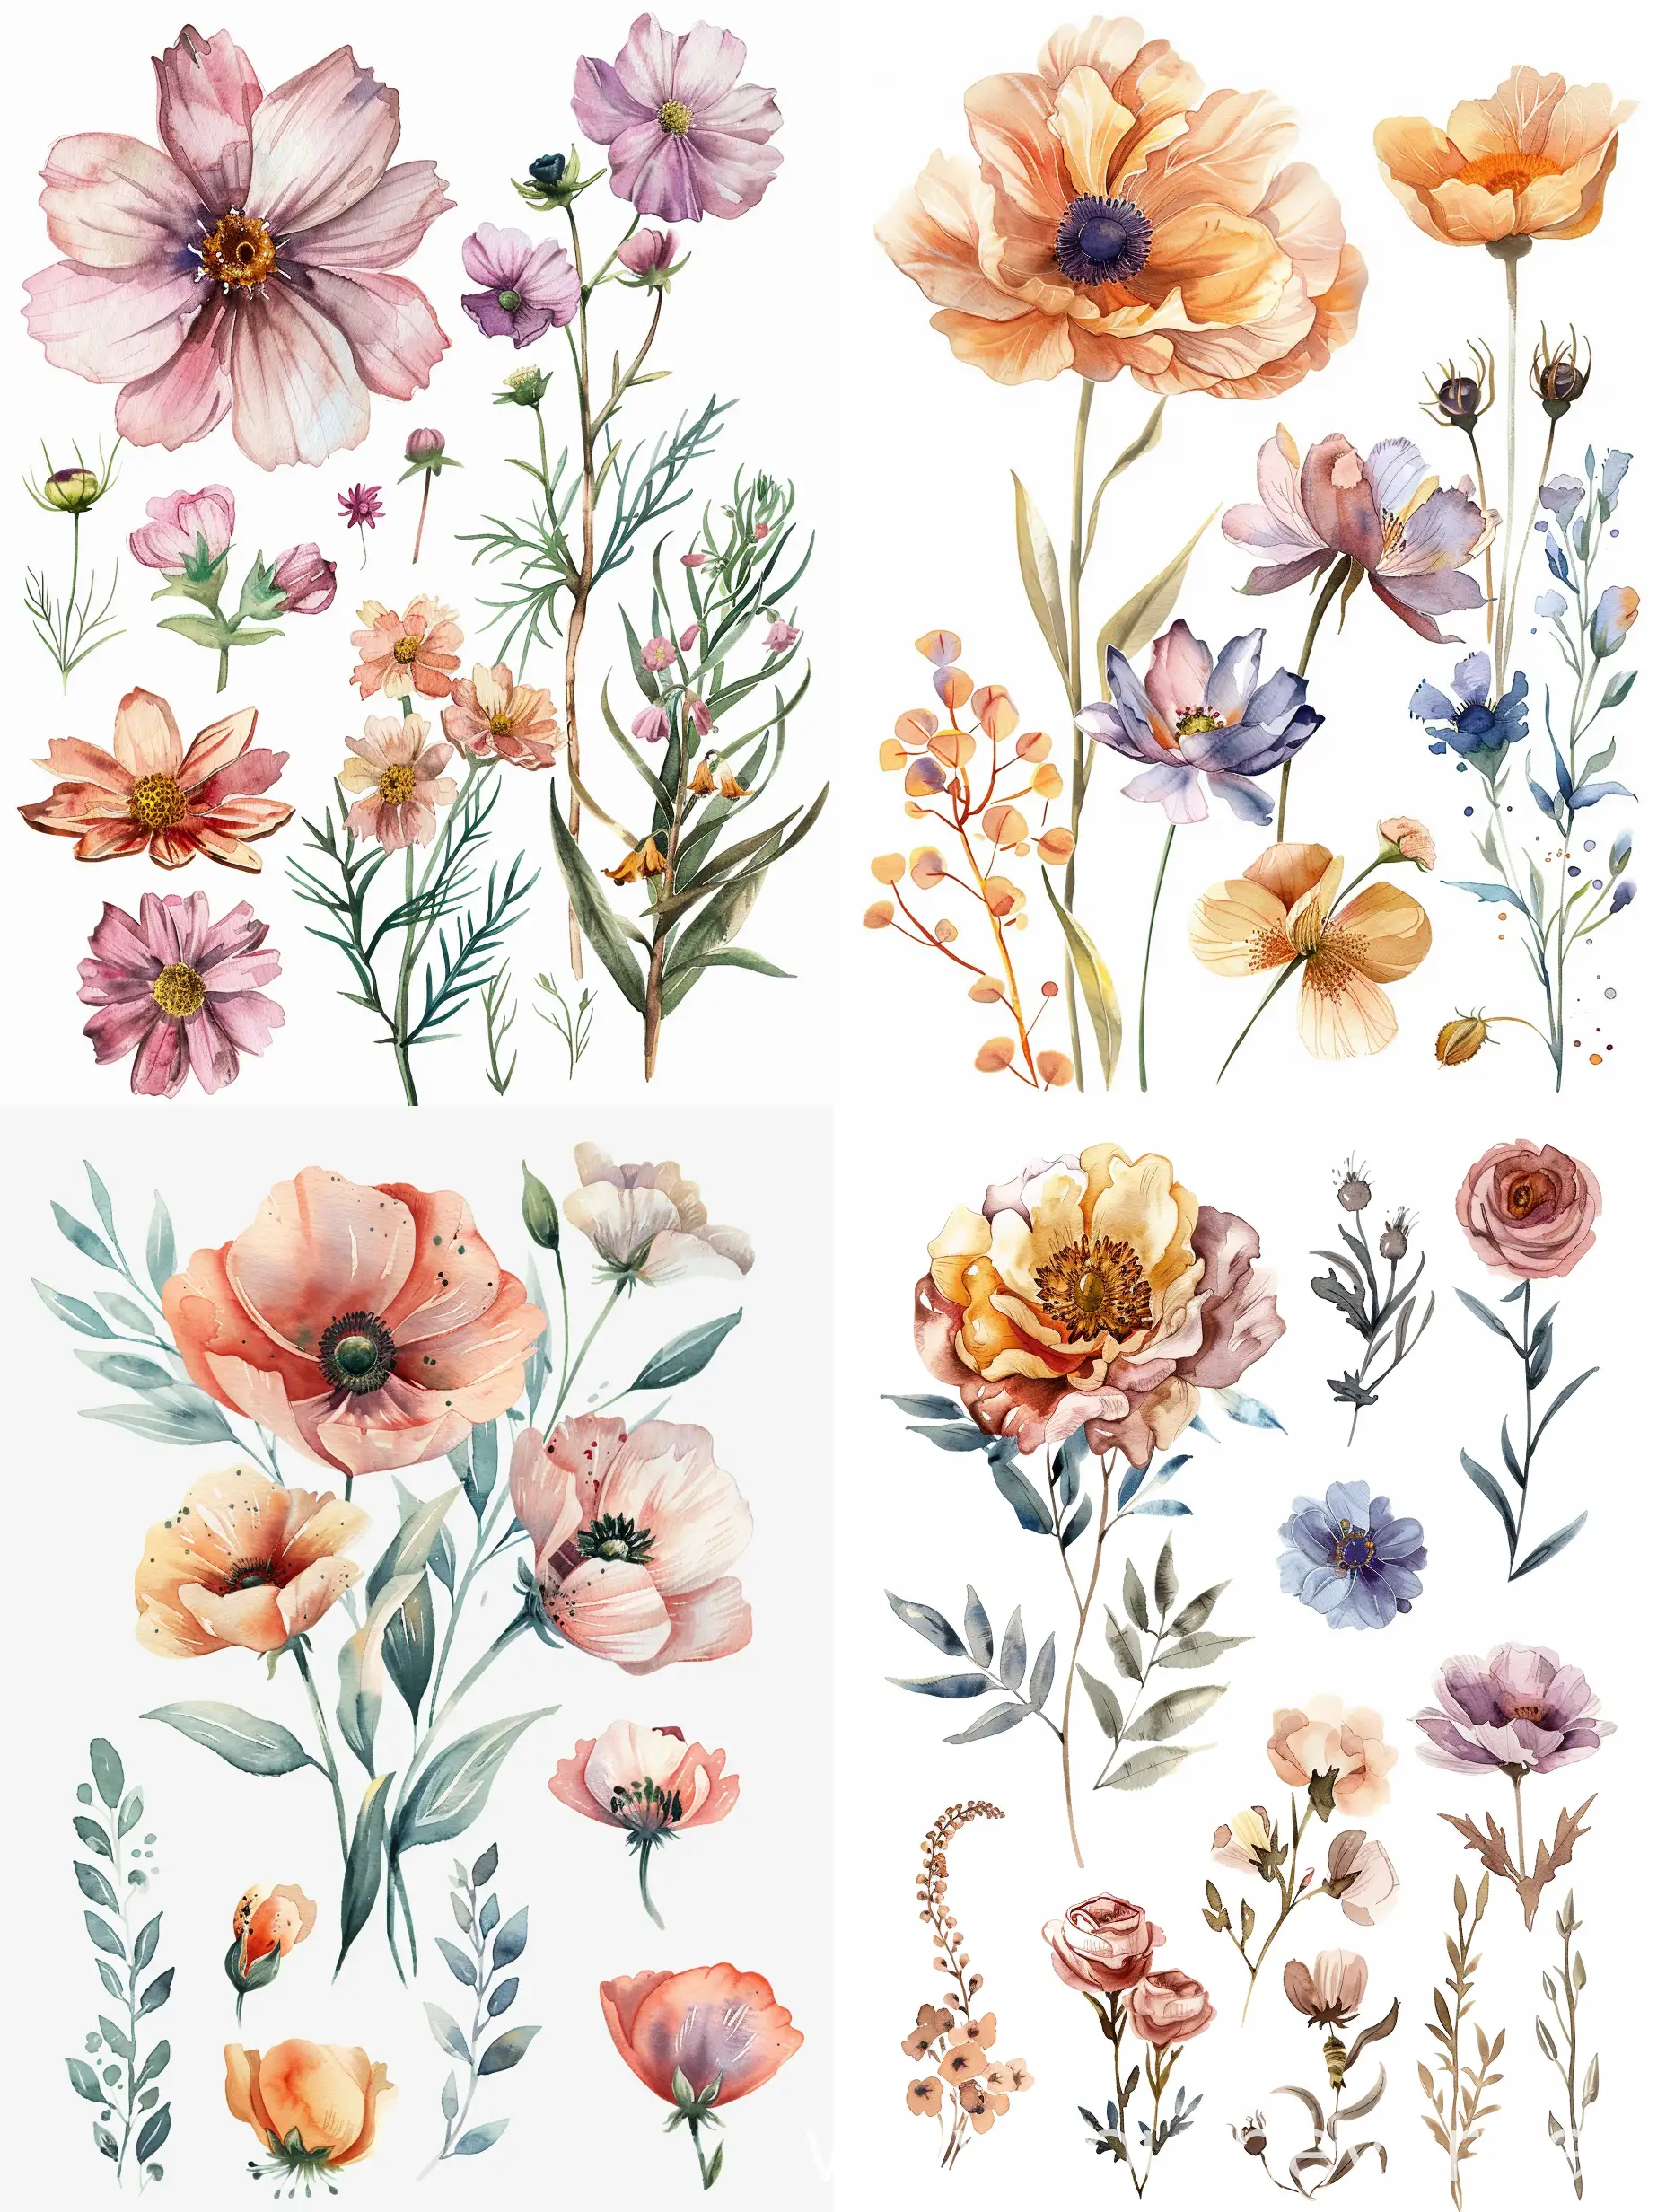 Elegant-Watercolor-Bouquet-Delicate-Shades-of-Individual-Flowers